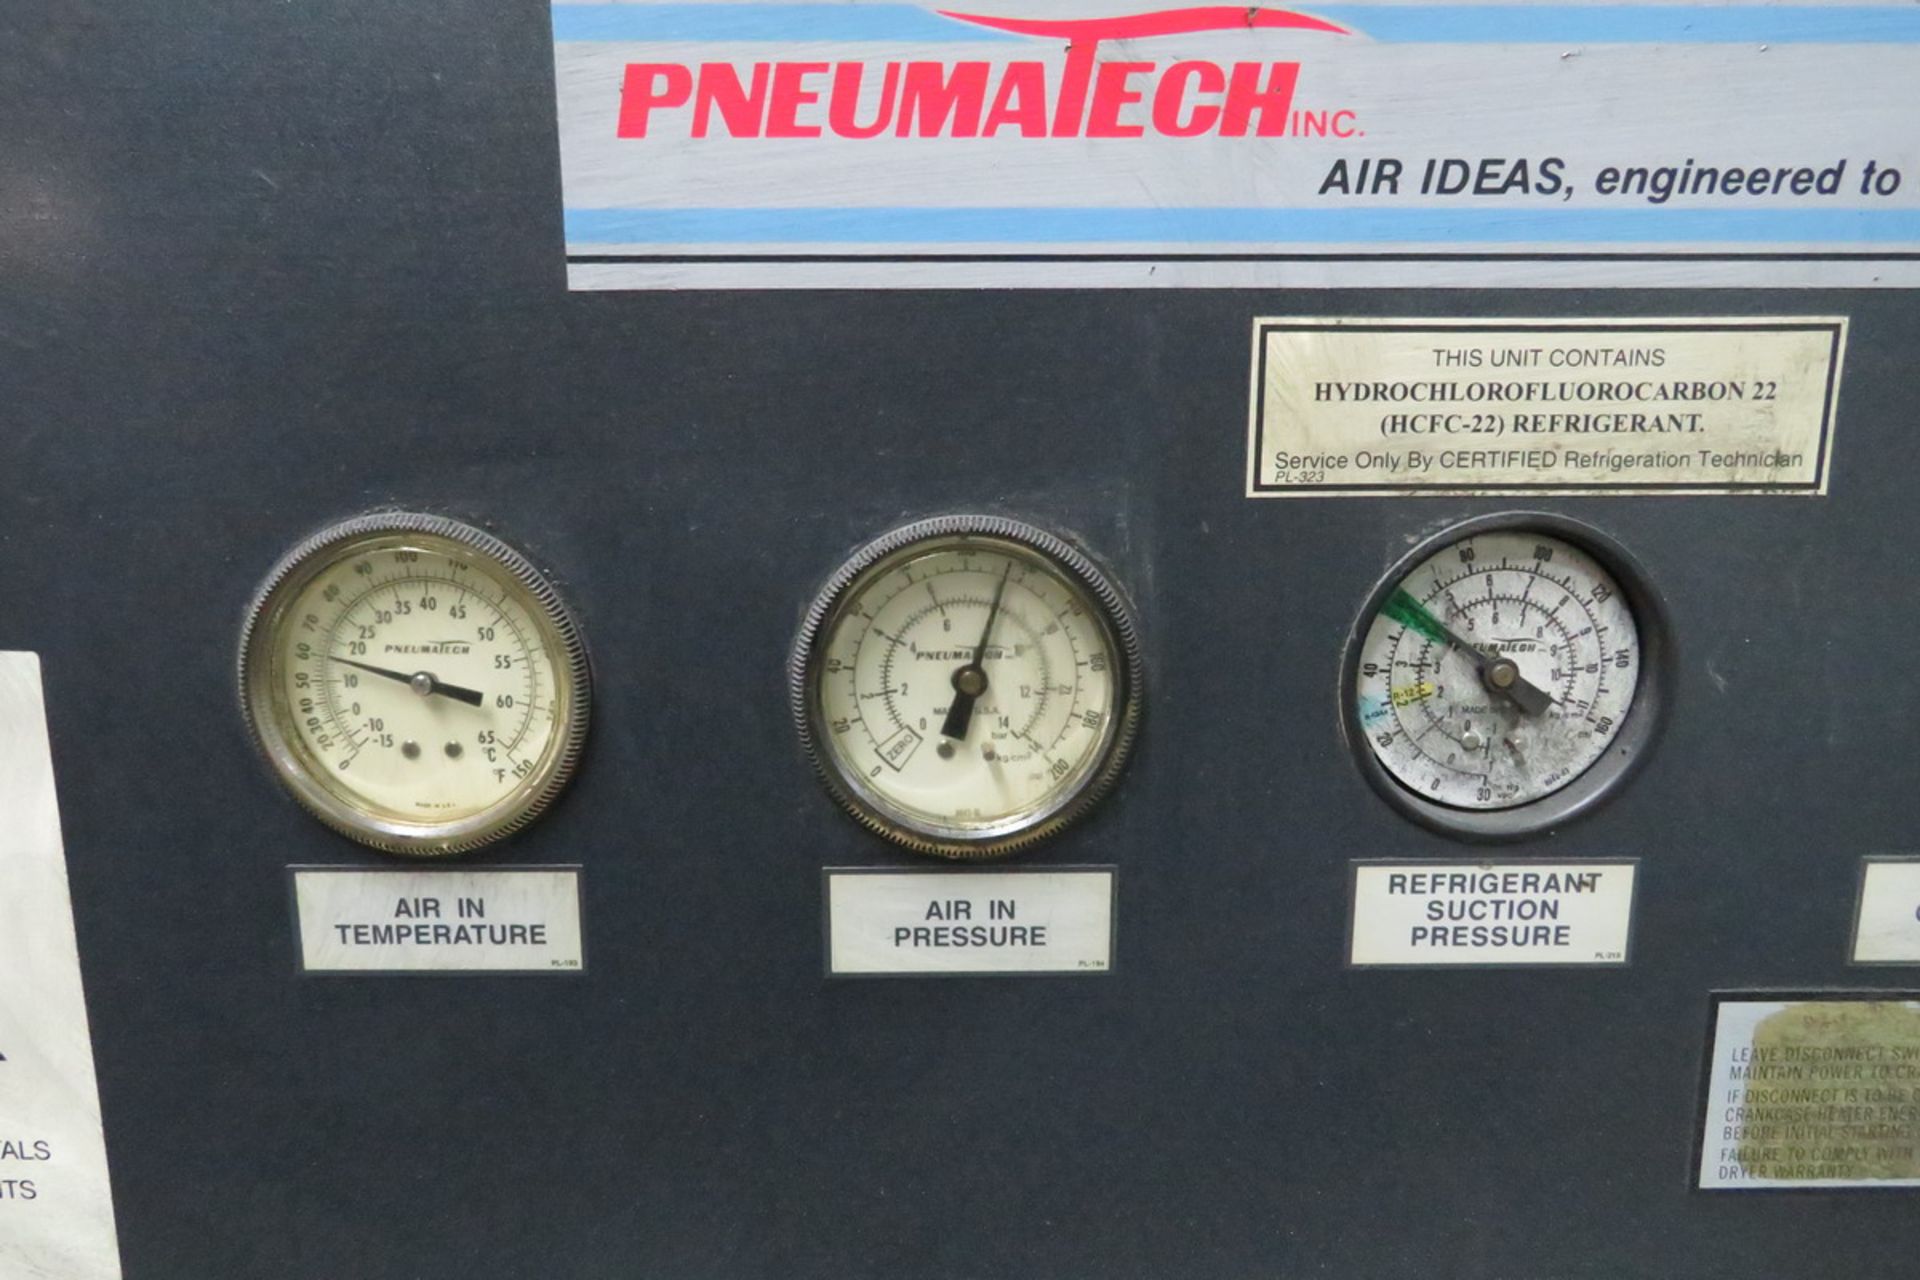 Pneumatech AD-500 Refrigerated Air Dryer - Image 3 of 4